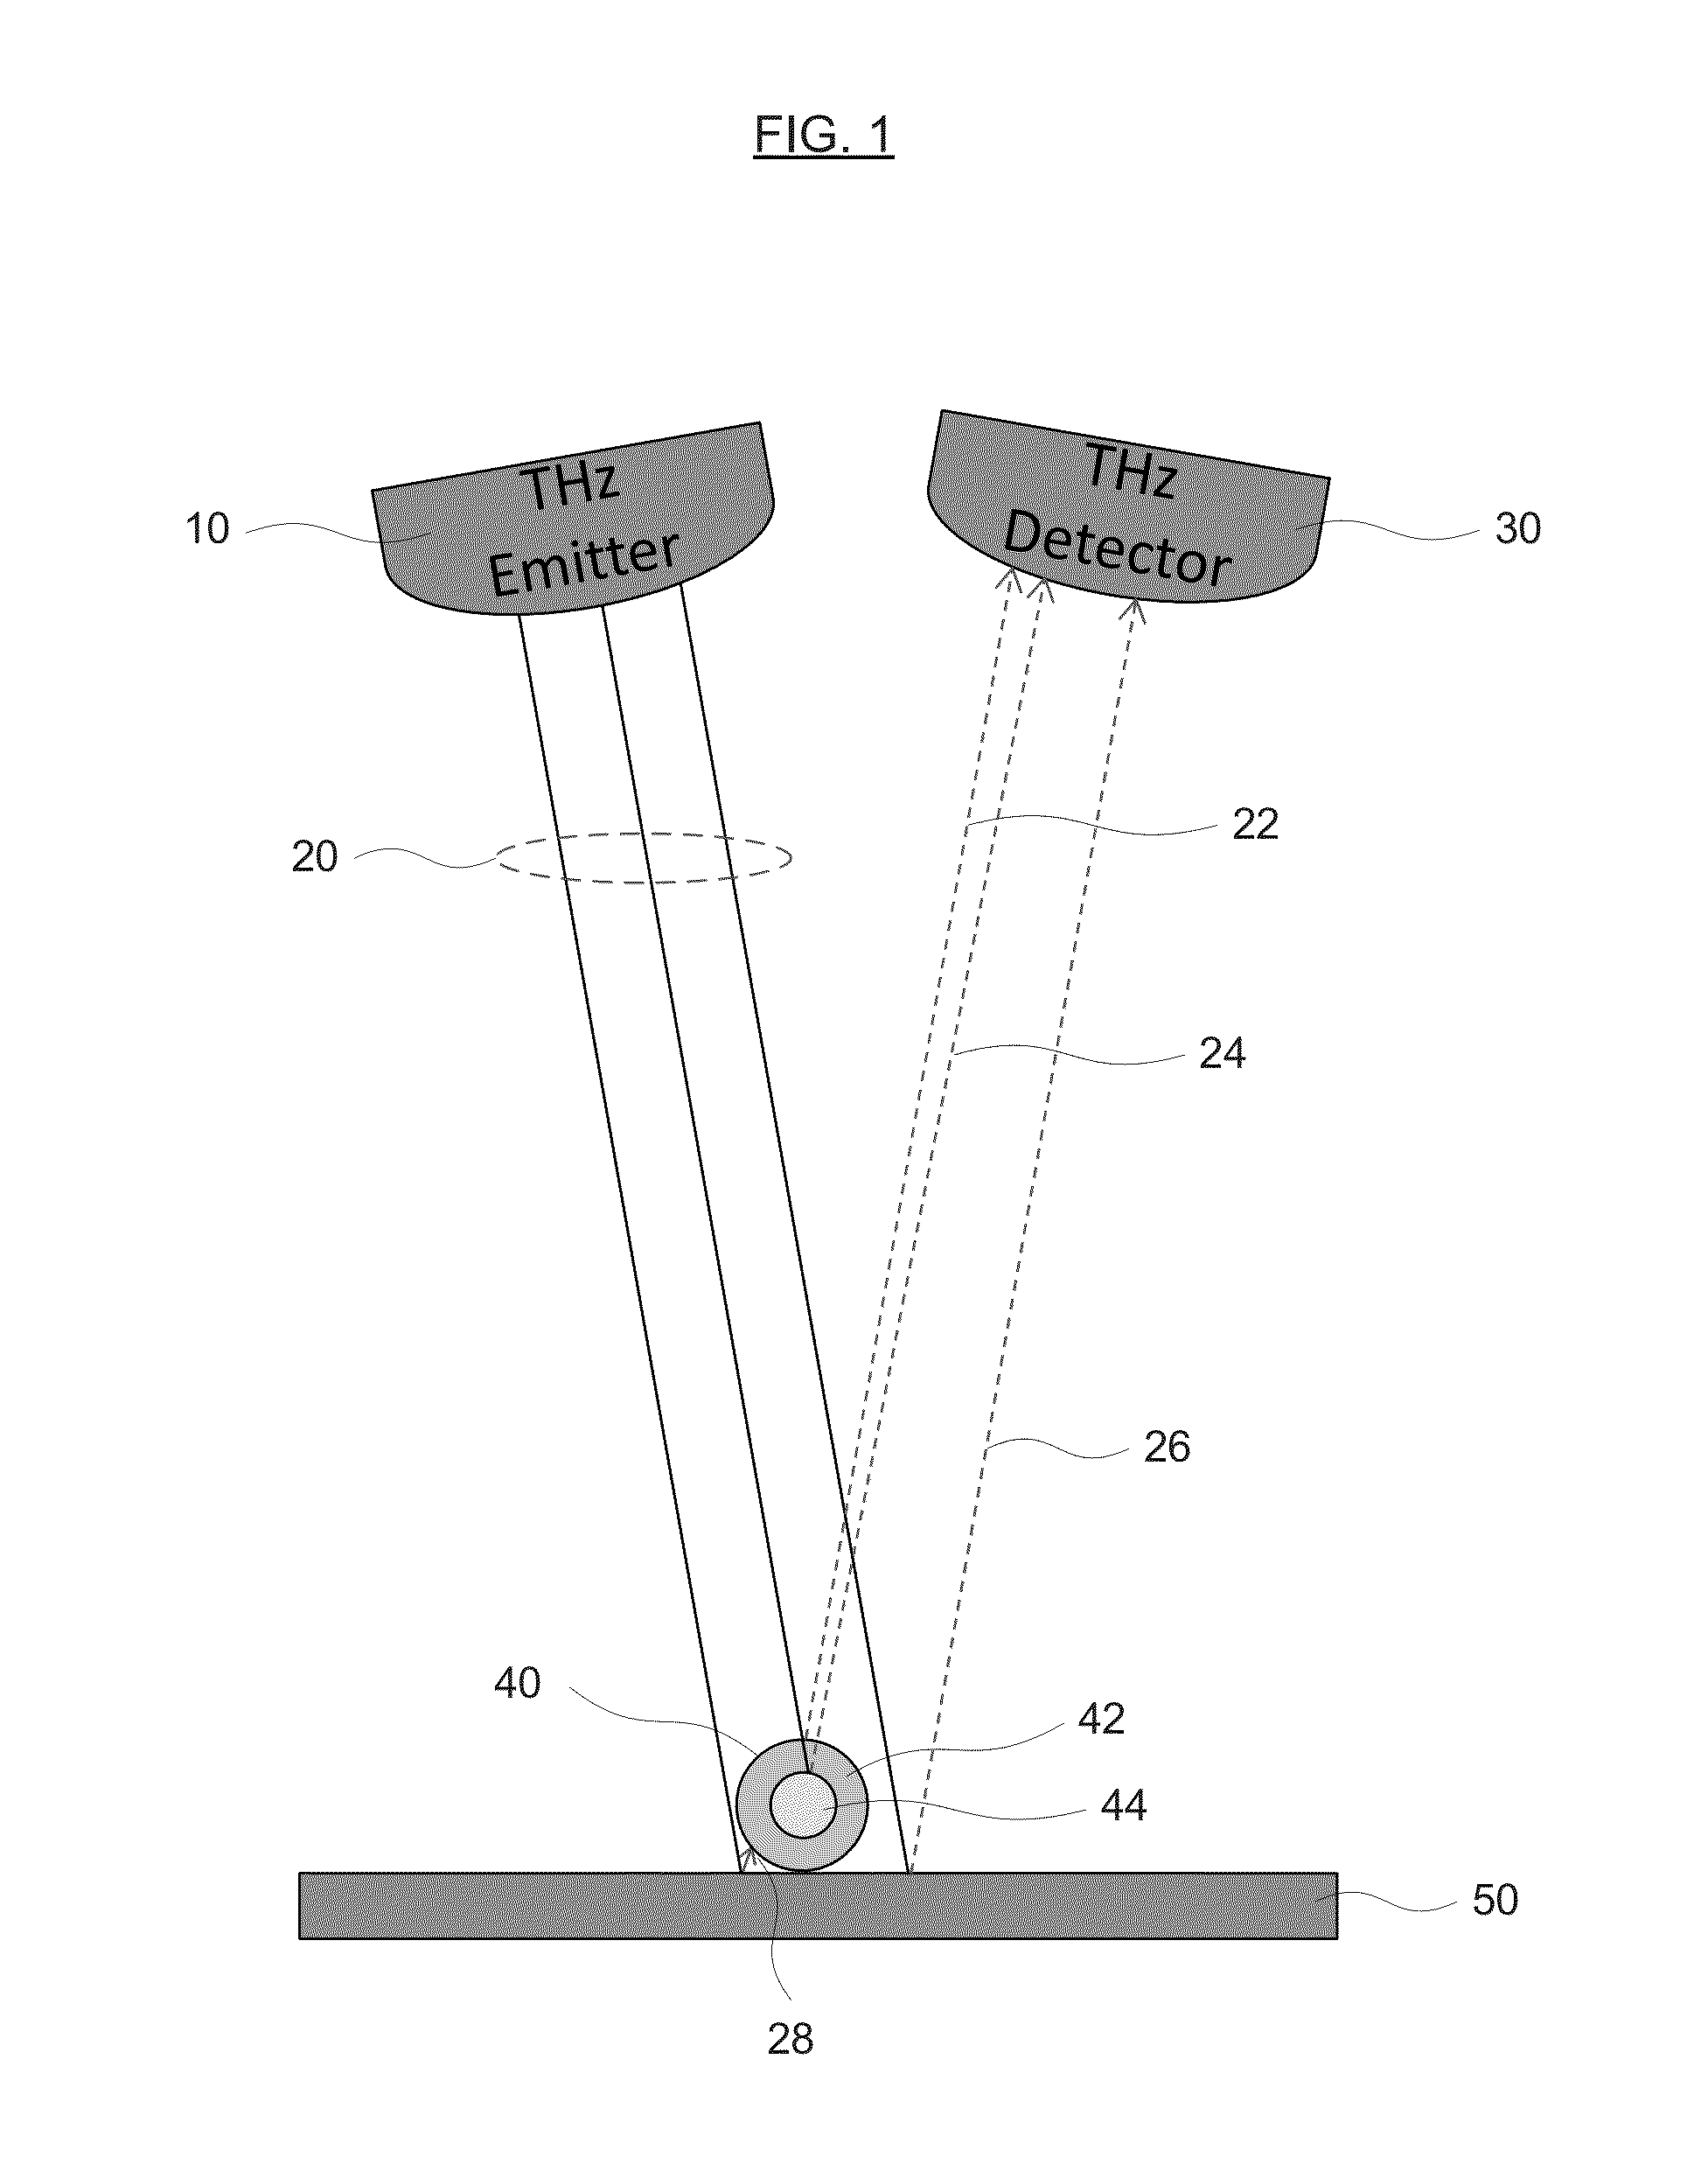 Methods, sampling device and apparatus for terahertz imaging and spectroscopy of coated beads, particles and/or microparticles